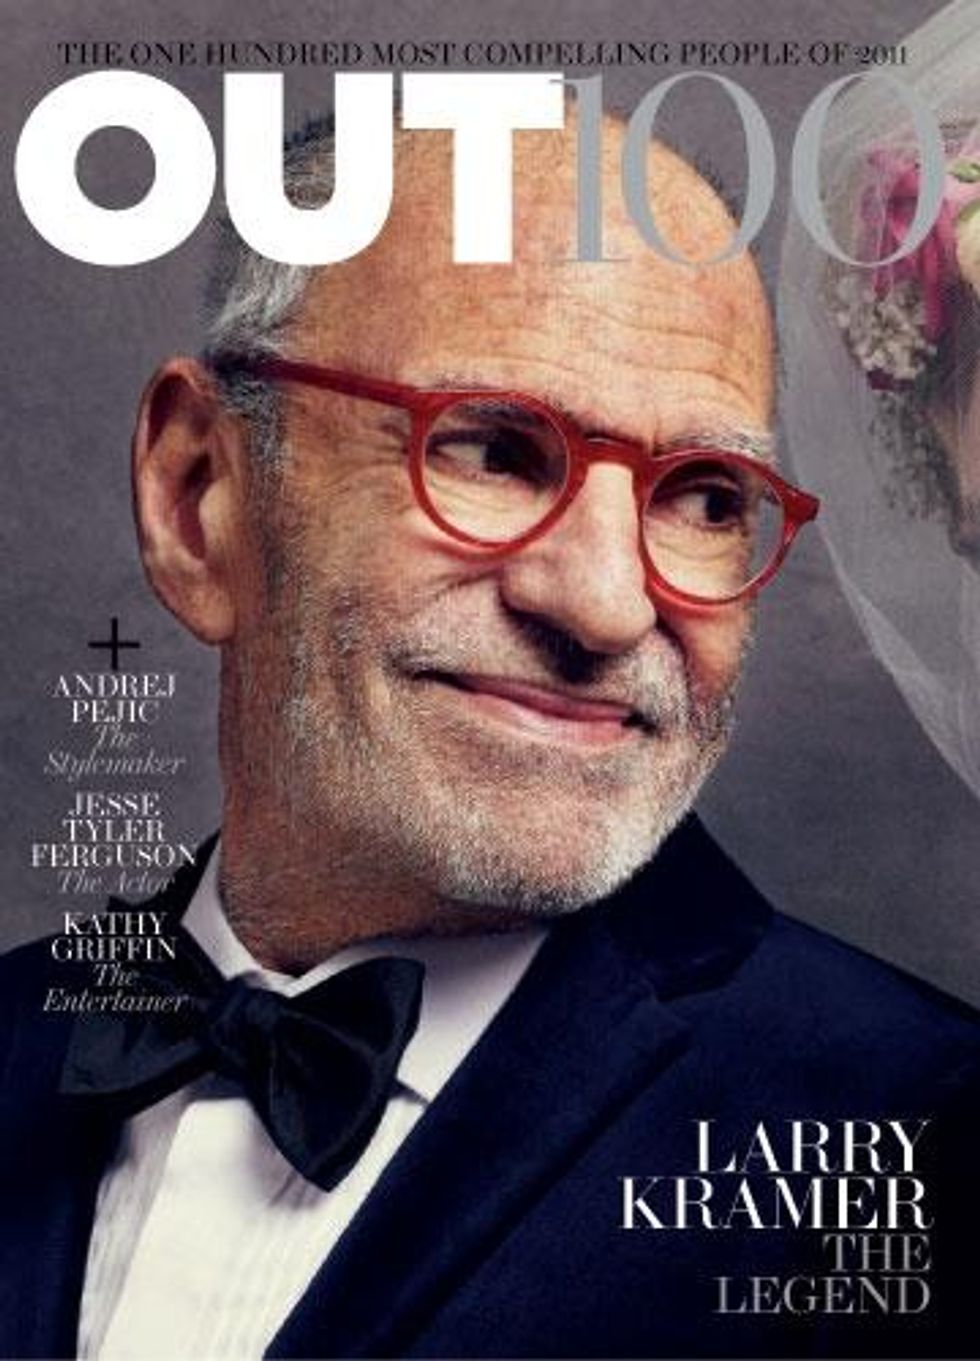 Larrykramer-out100-cover